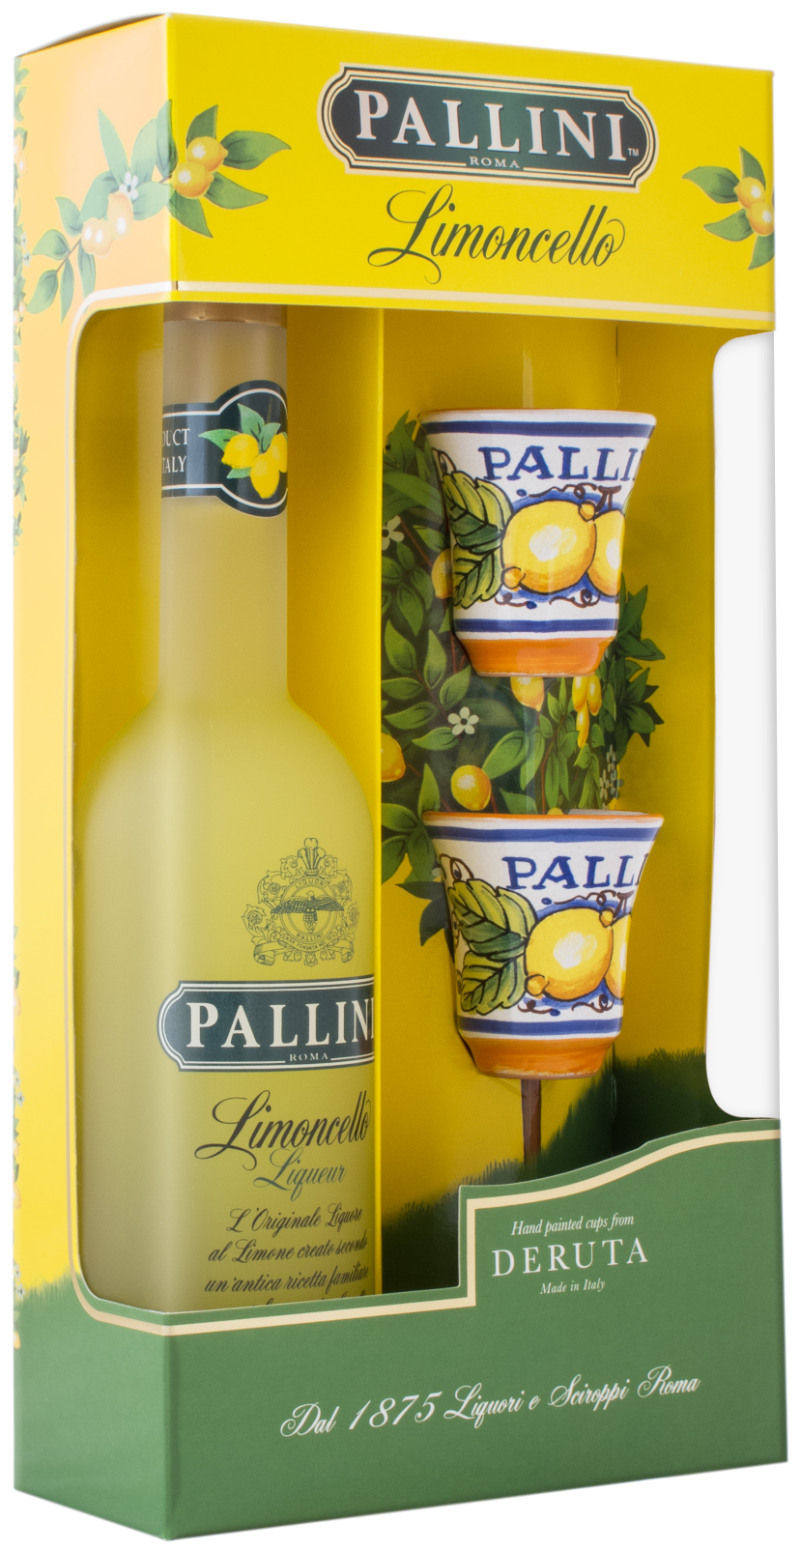 Pallini - Limoncello Giftpack 26% vol 50 cl